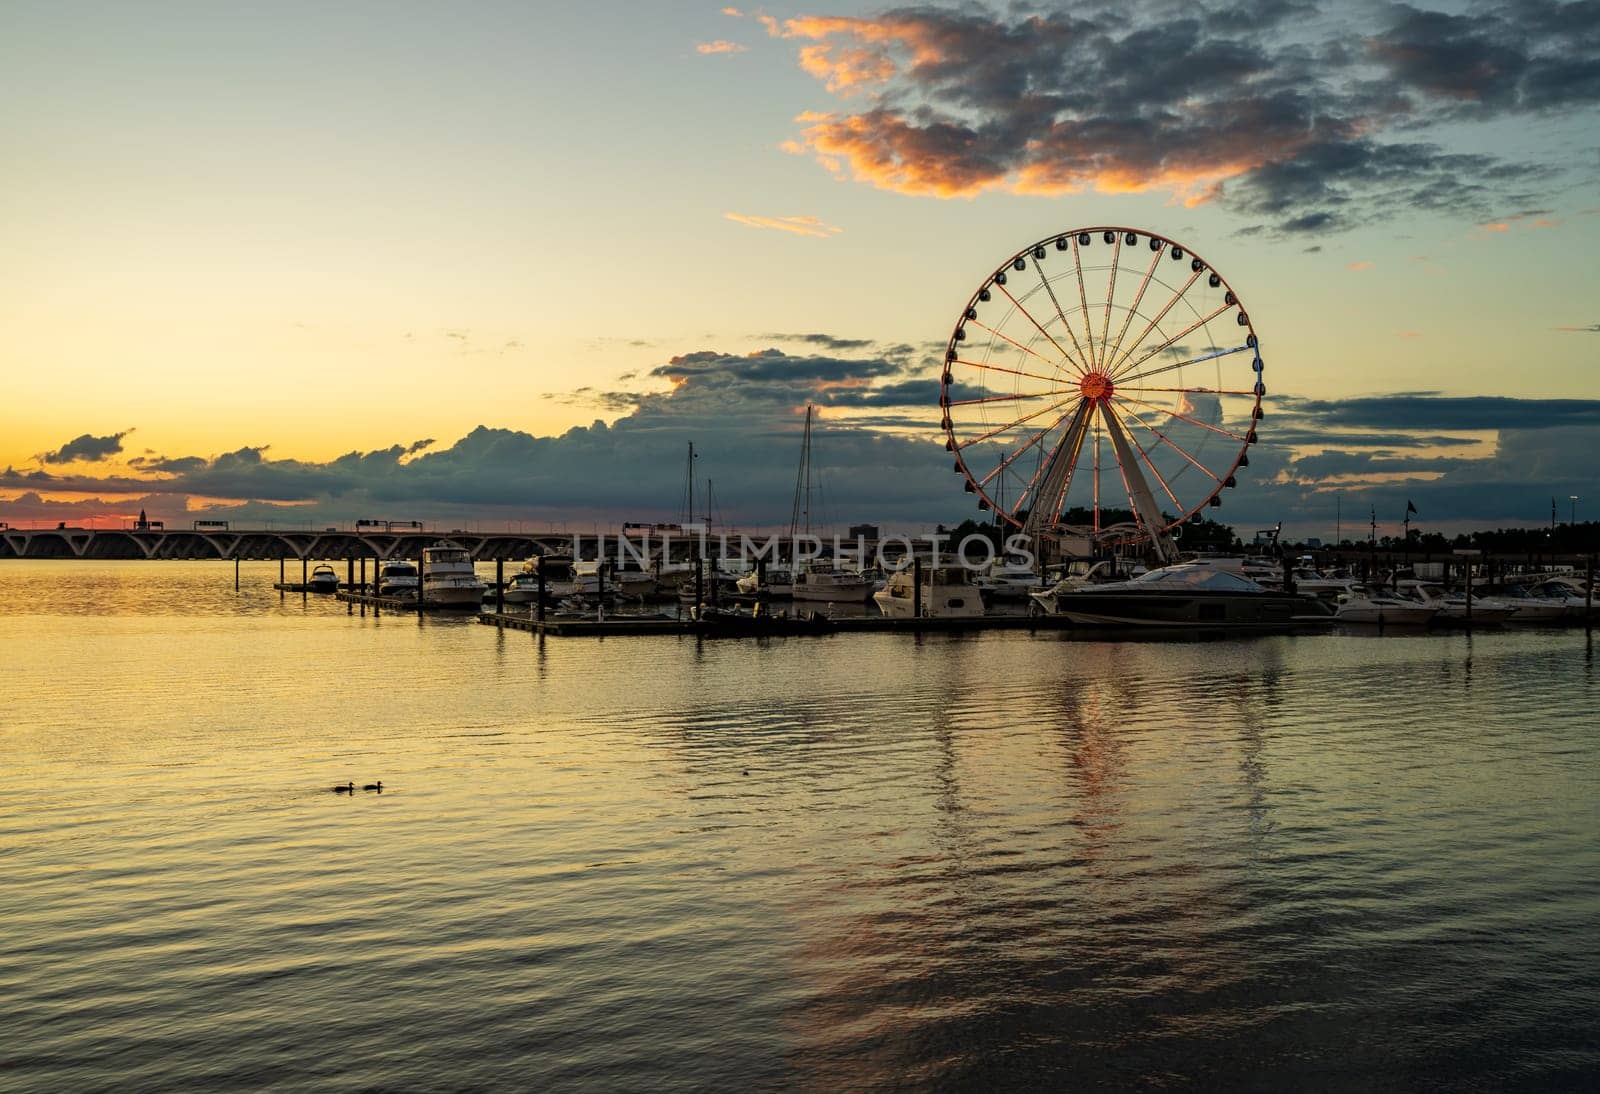 Ferris wheel at National Harbor at sunset by steheap